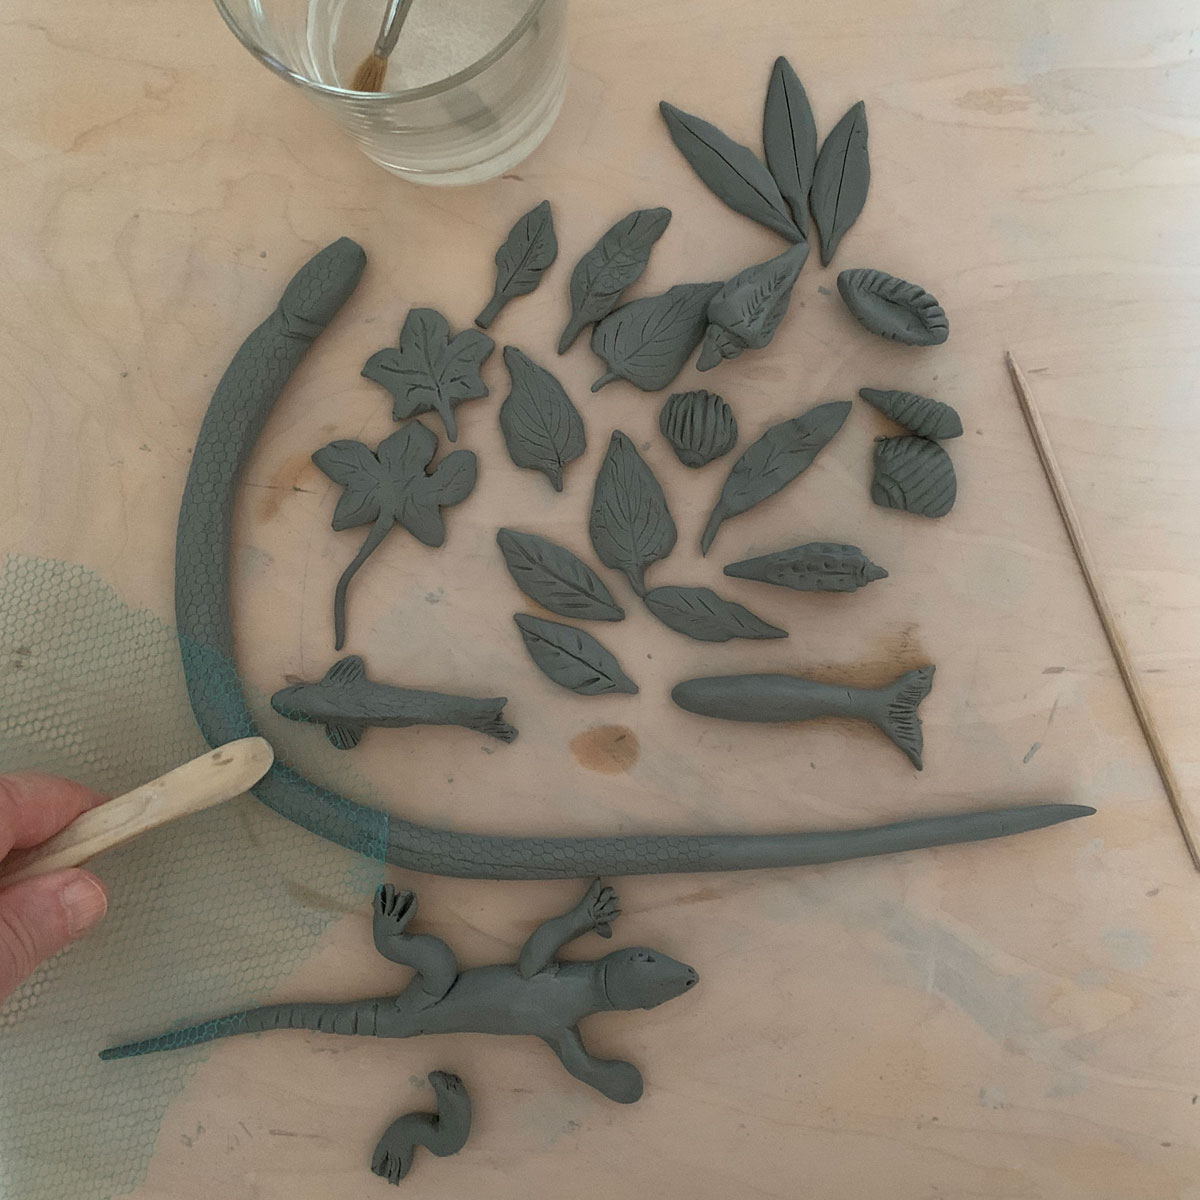 Clay leaves, a lizard, and other creatures